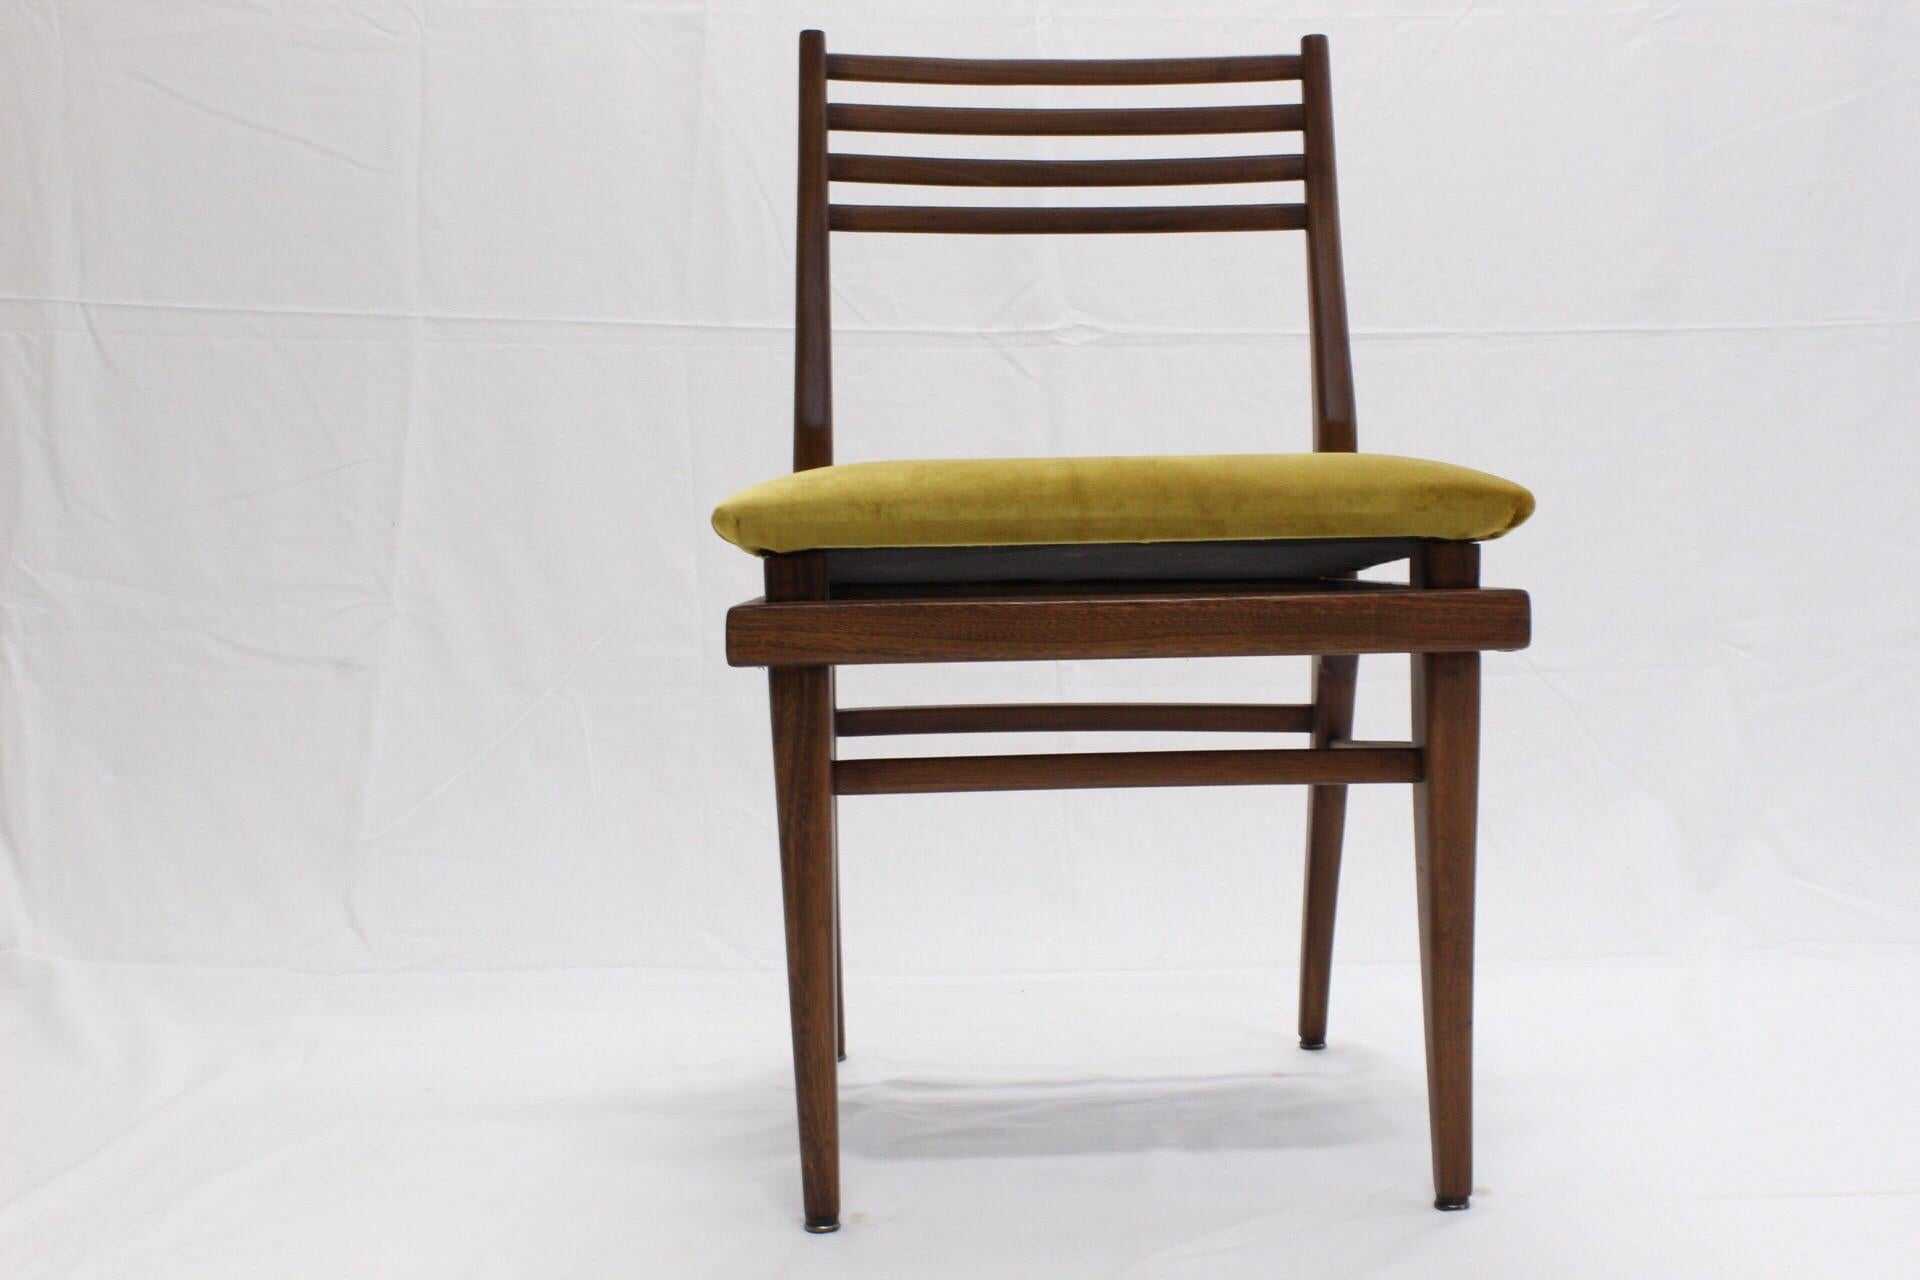 Mexican Mid-Century Modern Set of Four Chairs by Malinche, Mexico, circa 1960